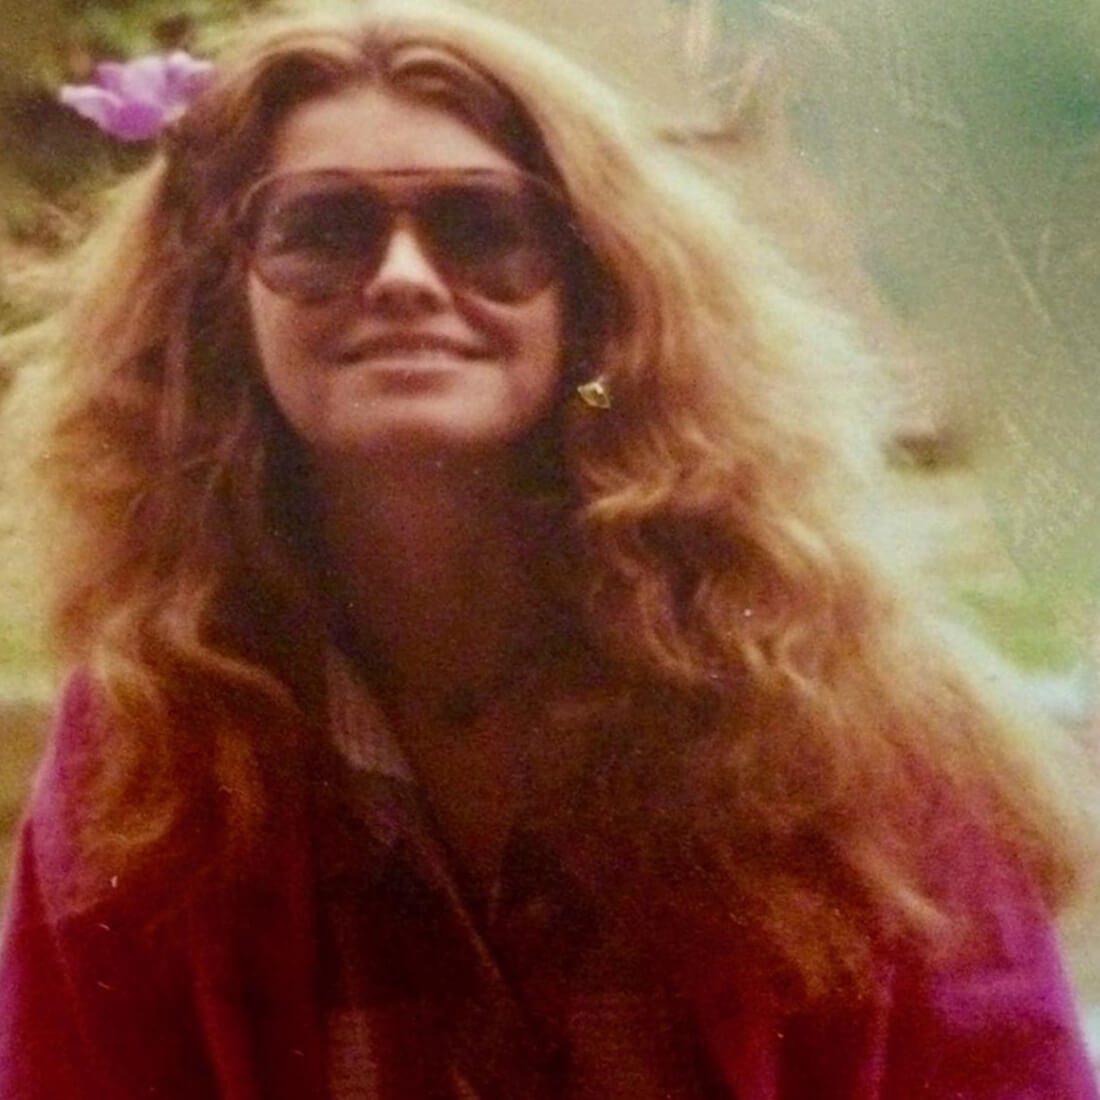 Archival photo of Yvonne Daley wearing a flower in her hair, magenta jacket and plaid shirt